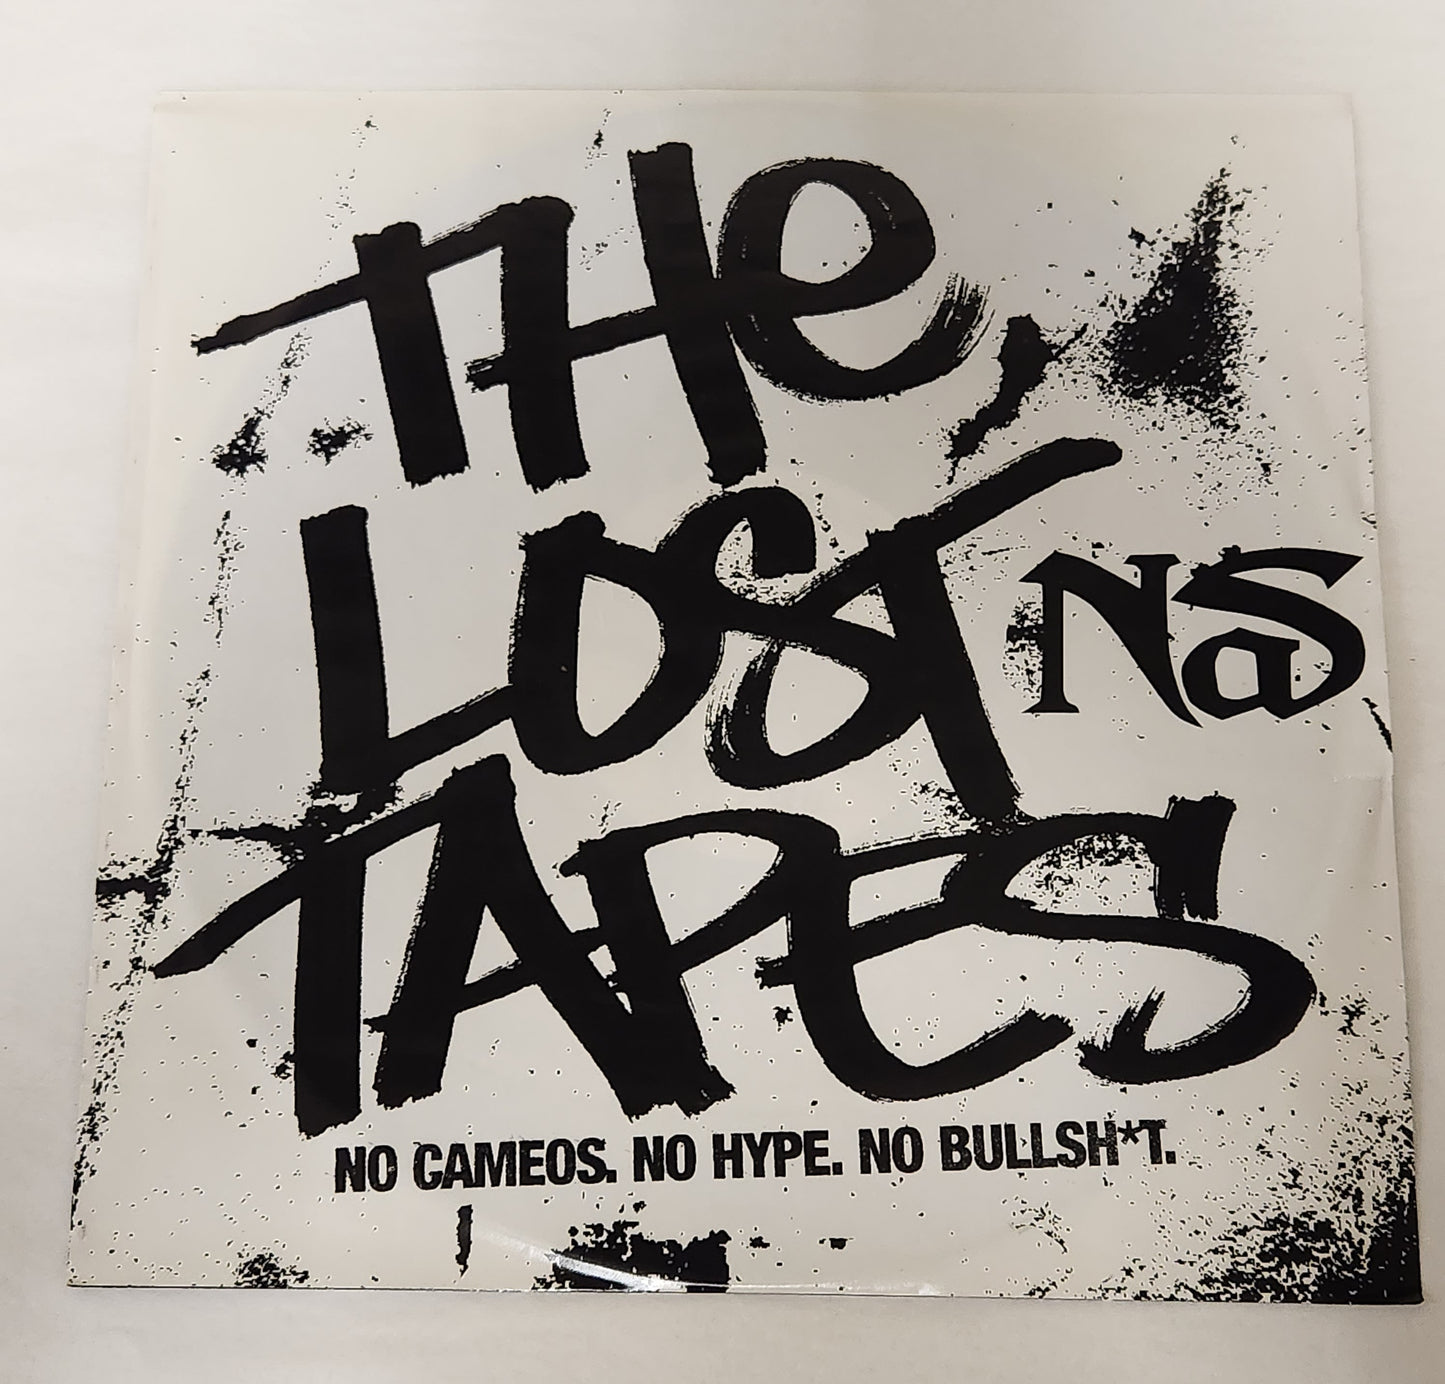 Nas "The Lost Tapes" 2002 Hip Hop 2 LP Record Album